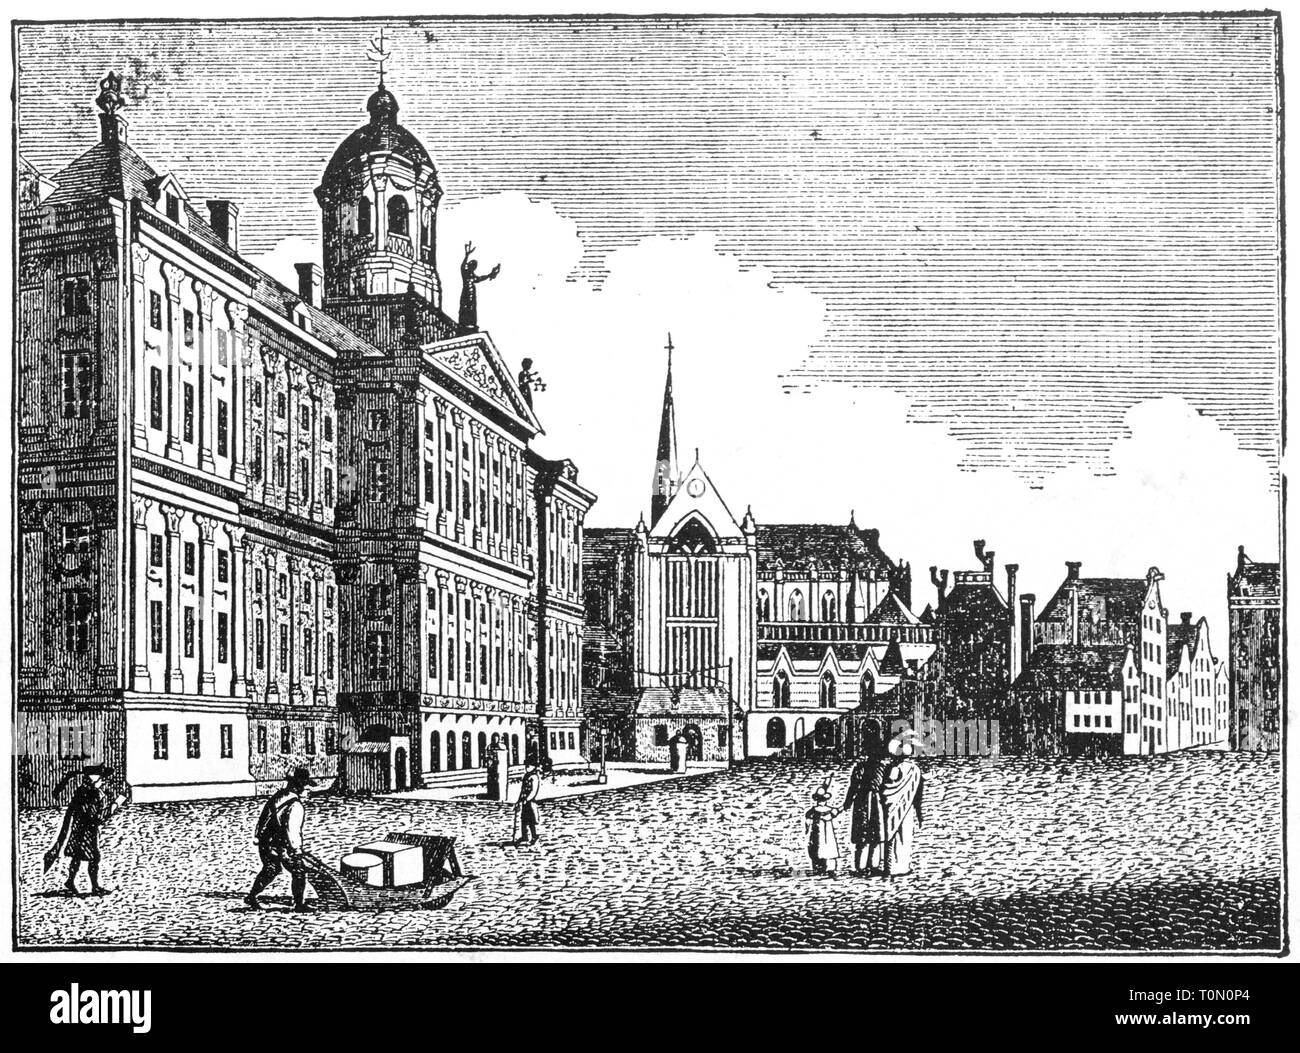 geography / travel, Netherlands, Amsterdam, castles, Paleis op de Dam (Royal palace), exterior view, after copper engraving, early 19th century, Stadhuis, town house, town houses, Nieuwe Kerk, new church, building, buildings, square, squares, city, old town, historic city centre, historic city center, people, North Holland, Western Europe, palace, palaces, castle, castles, historic, historical, Artist's Copyright has not to be cleared Stock Photo